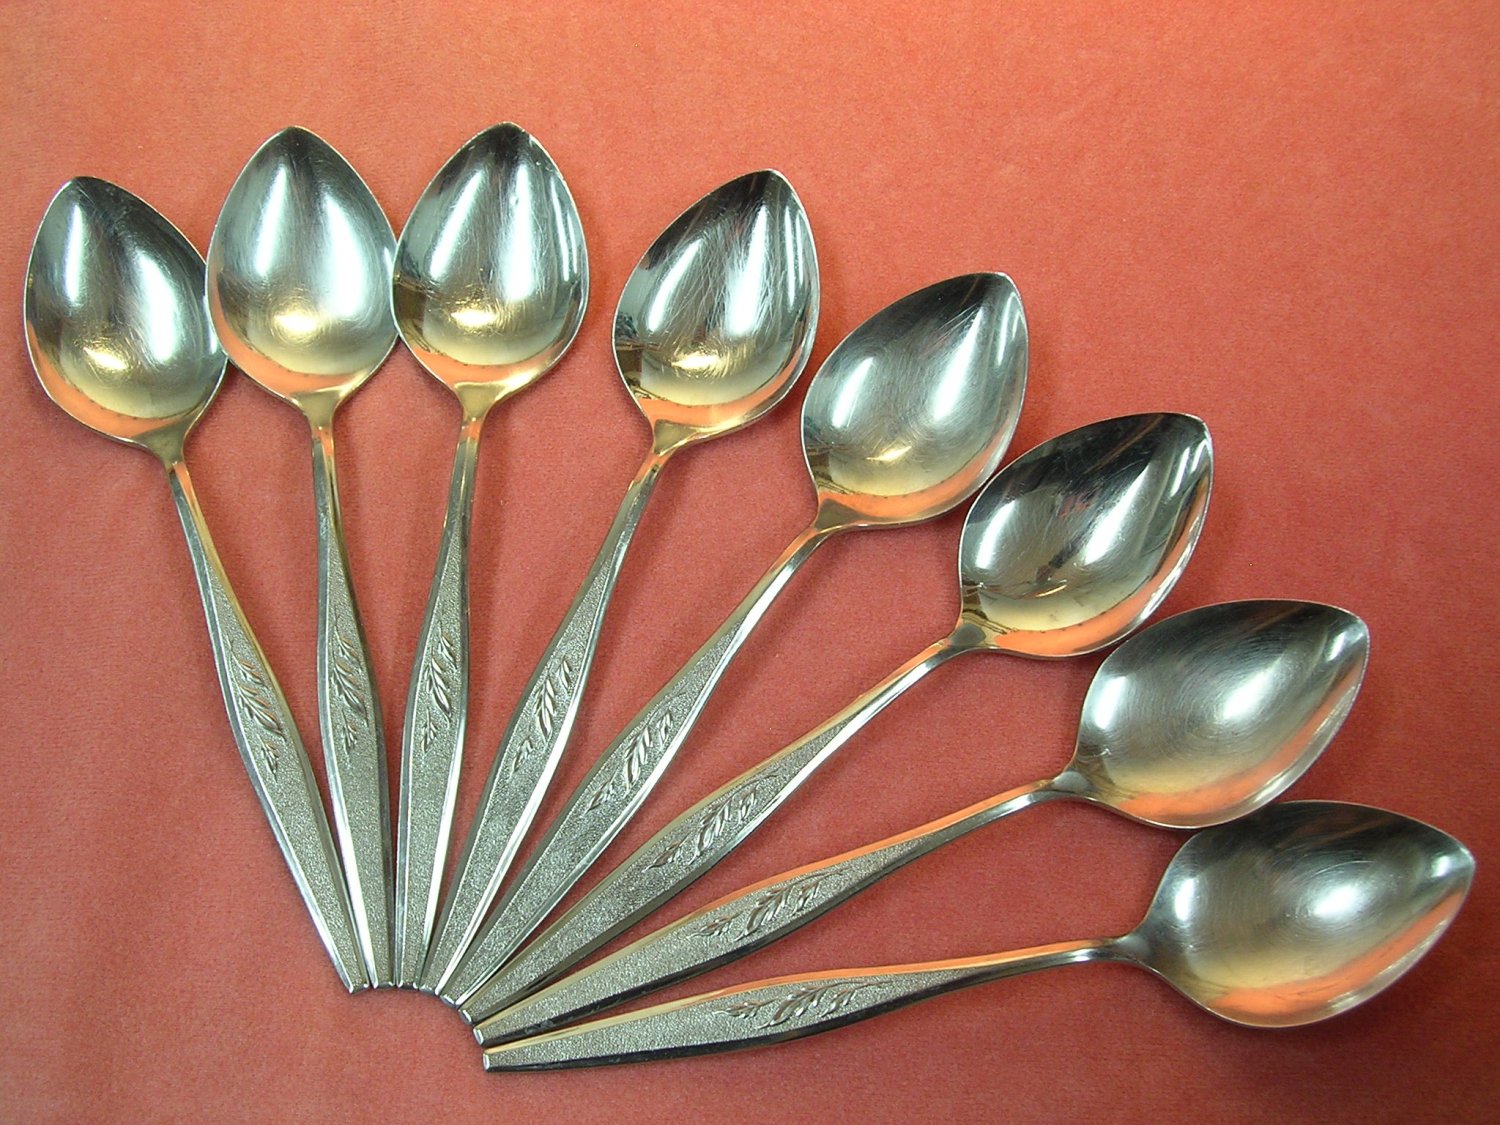 ONEIDA WOODMERE 7 PLACE SPOONS COMMUNITY STAINLESS FLATWARE SILVERWARE